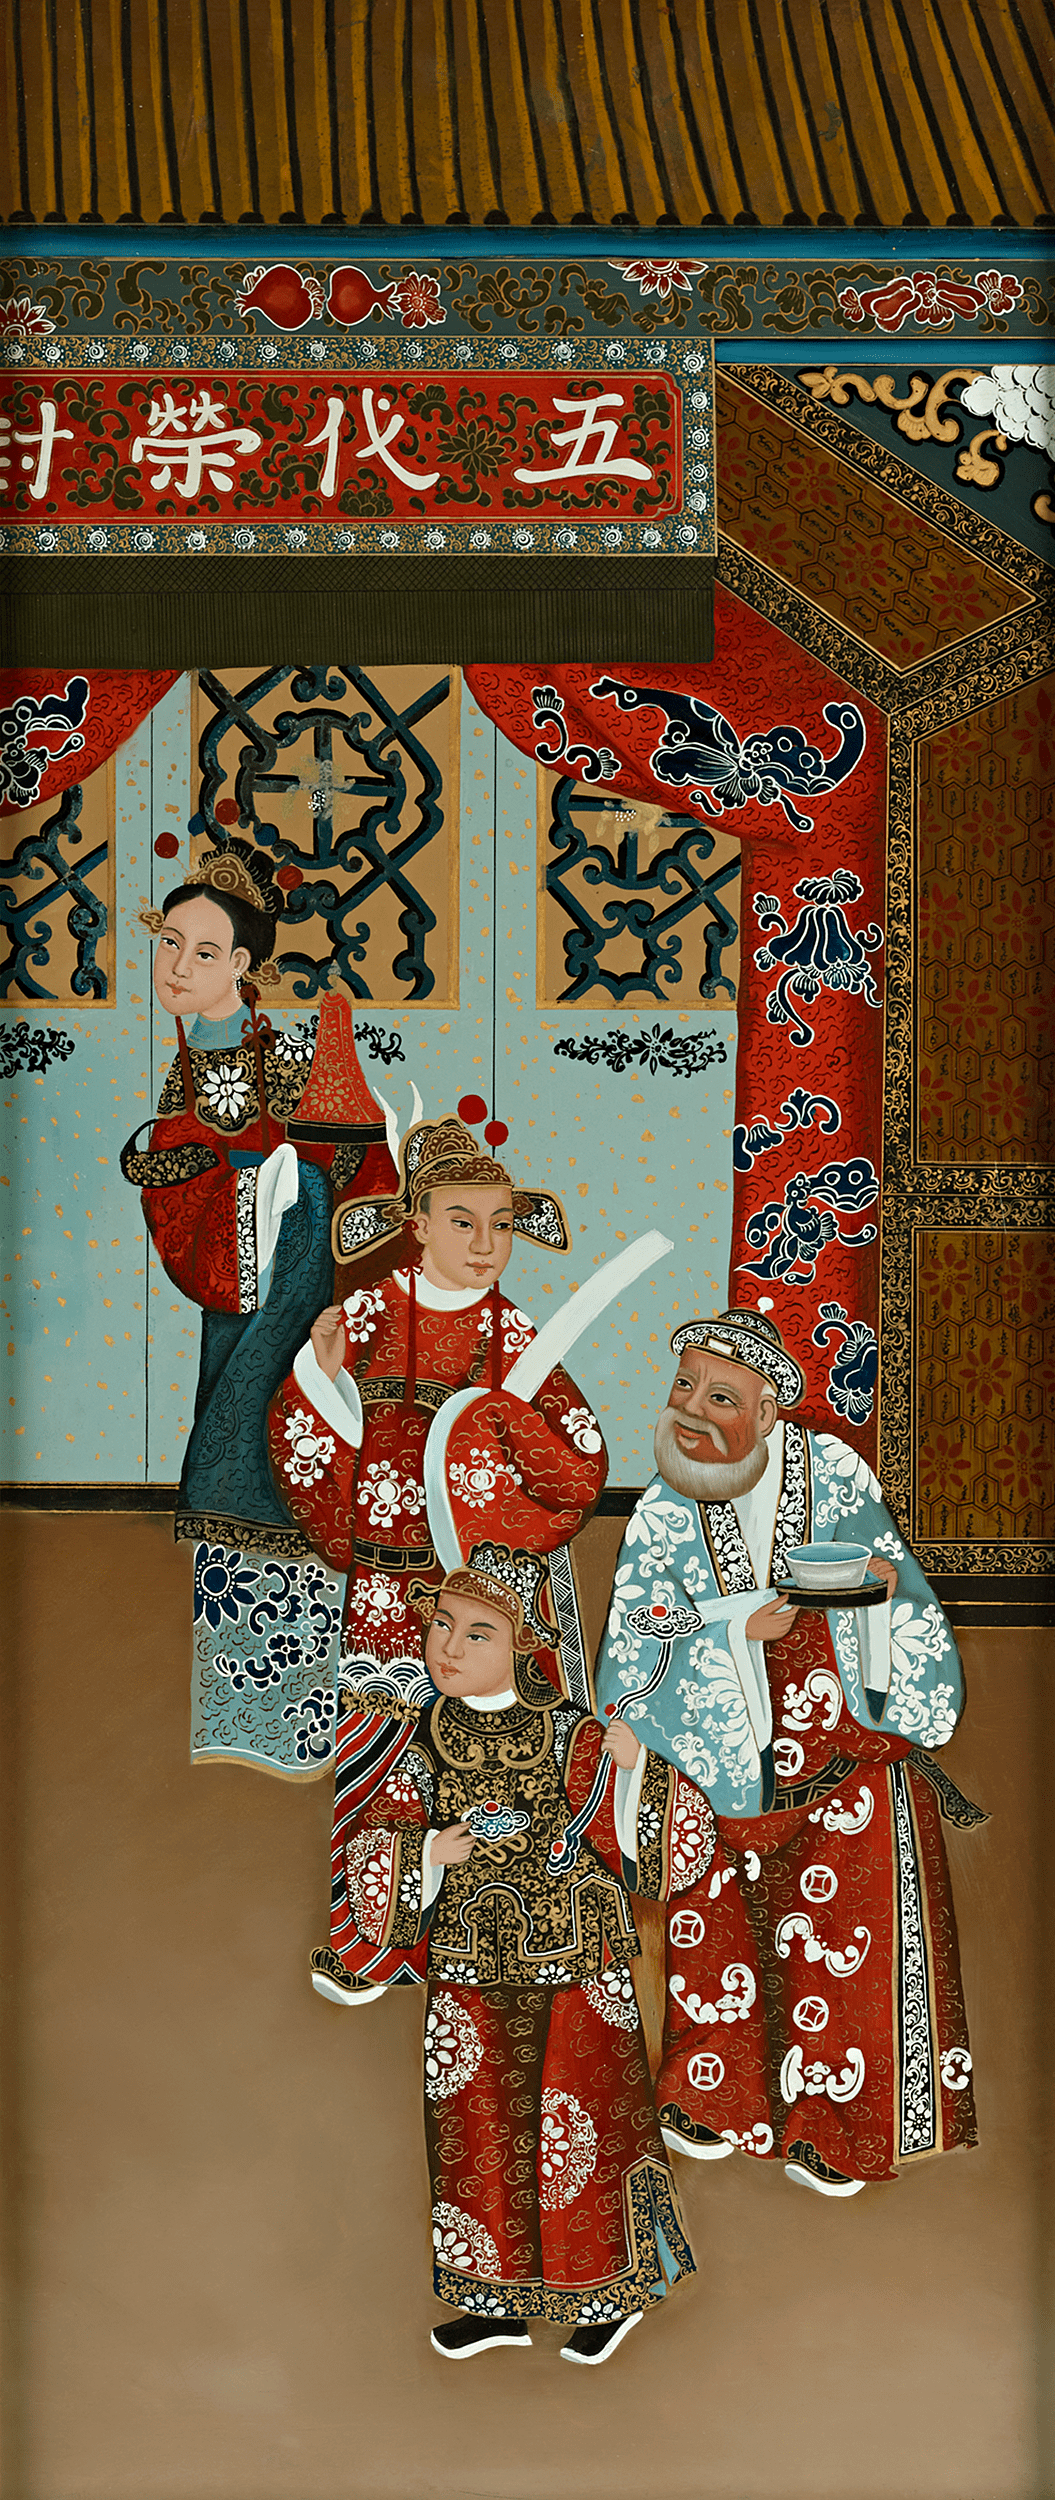 Qing Dynasty Reverse Glass Work - Four Figures in Procession